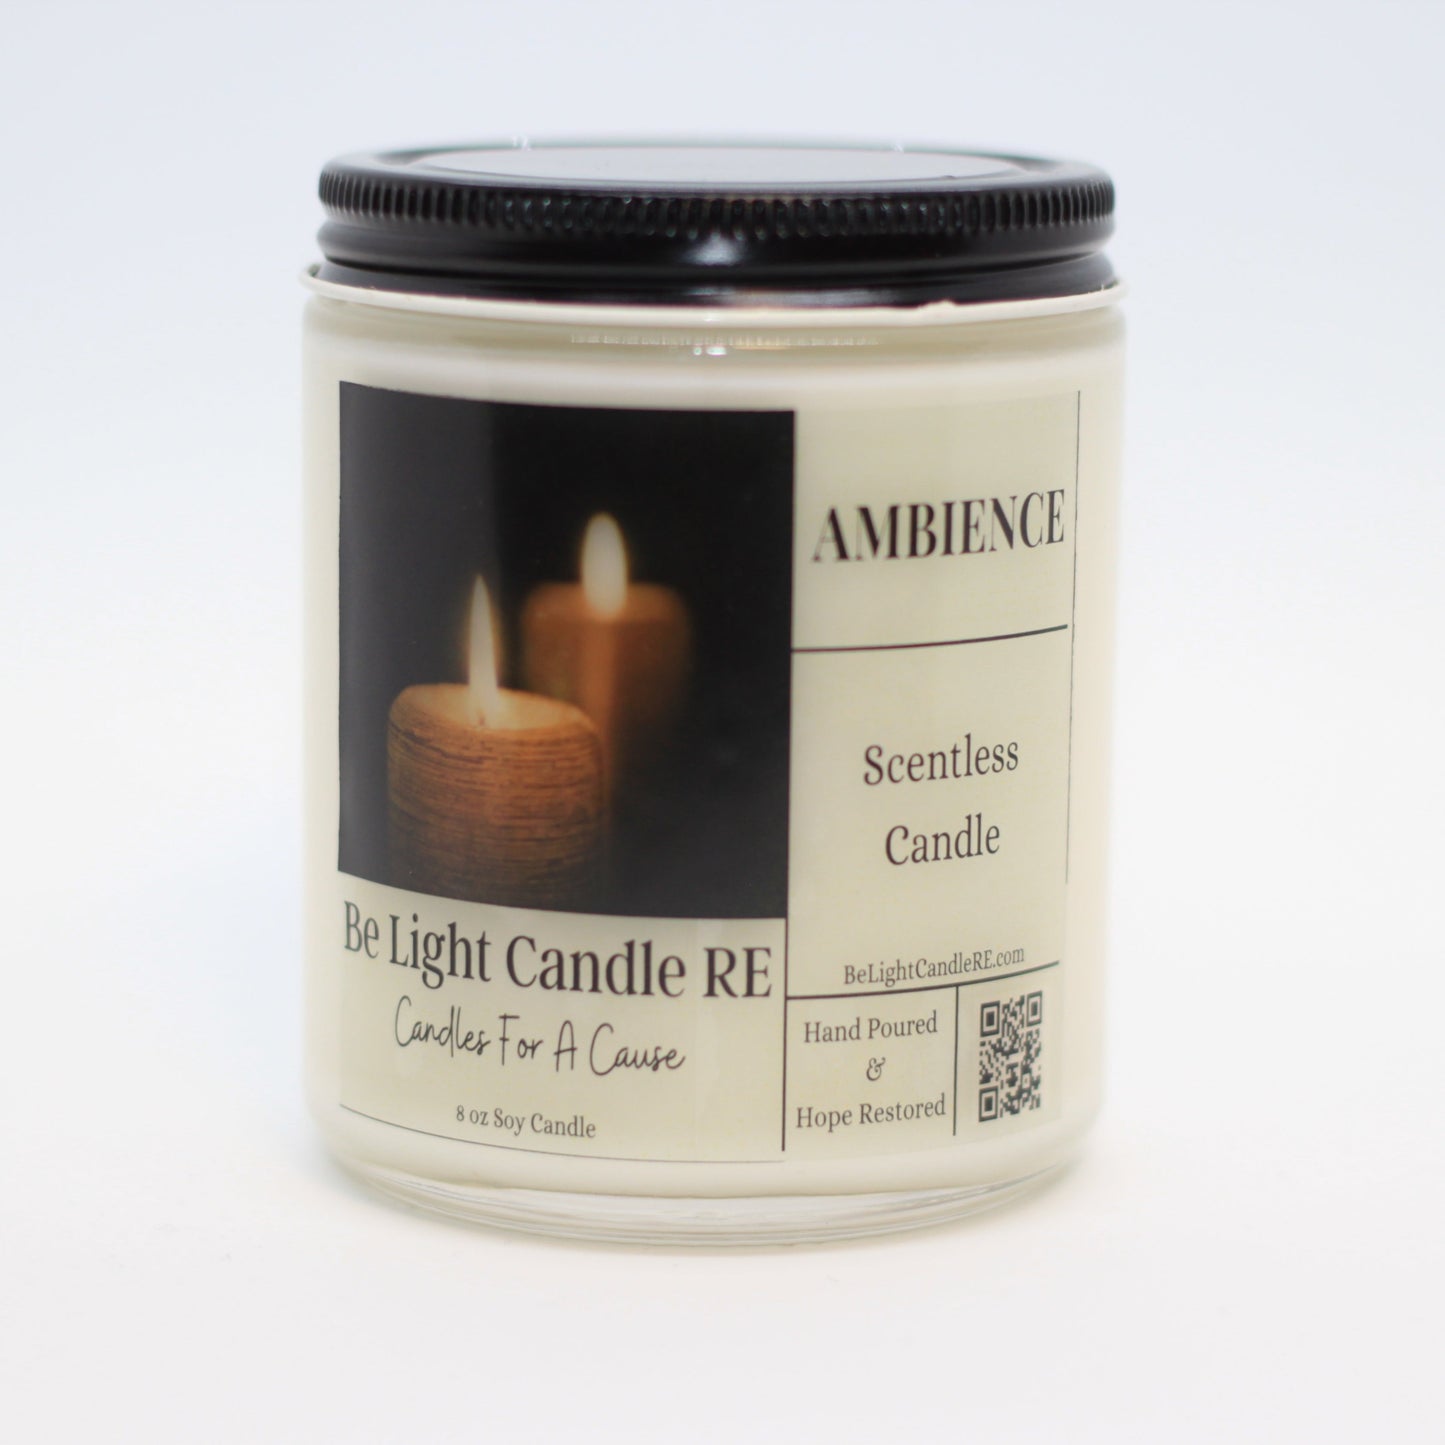 Scentless Candle, Scented candles, birthday candle, candle amazon, candle light, candles, candle, candles for men, scented candles amazon